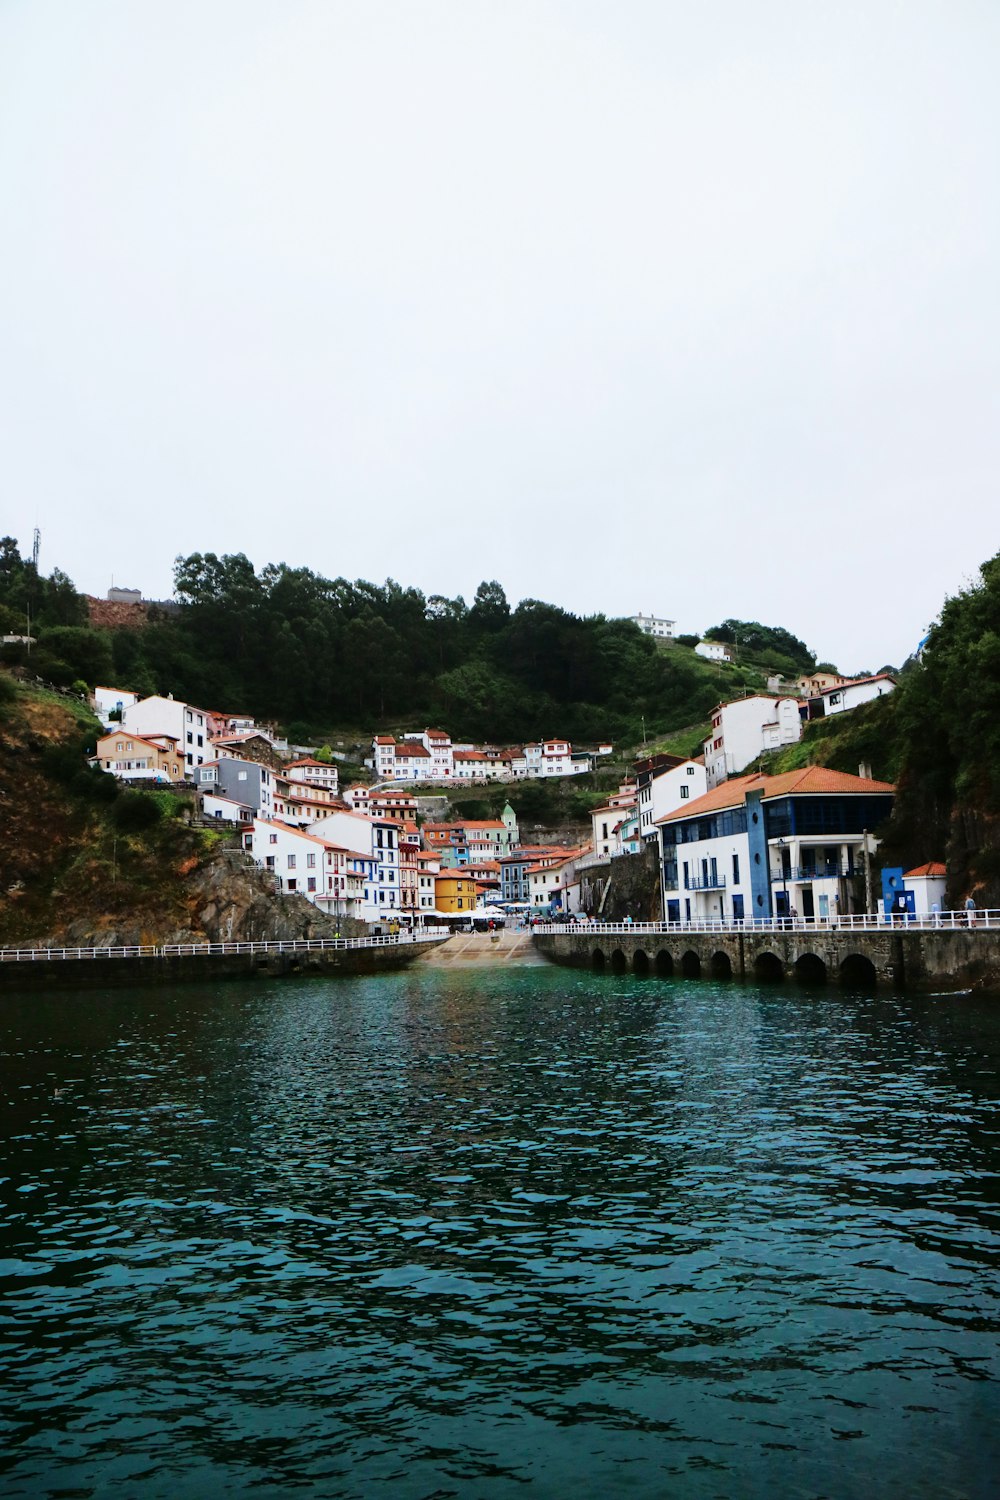 houses near river during daytime